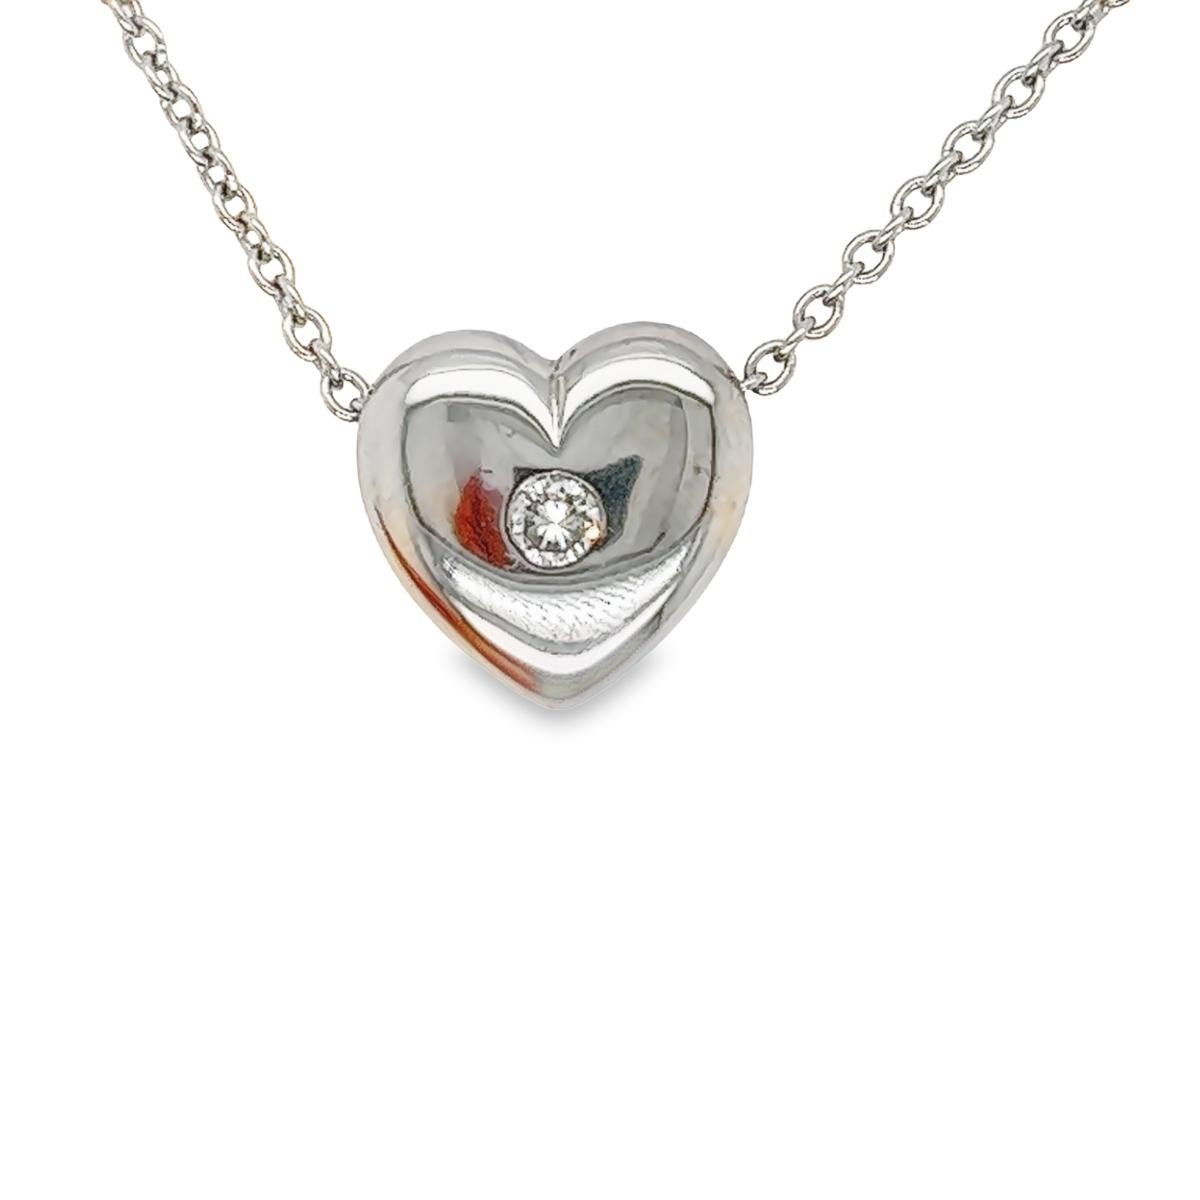 This is a perfect gift for the one you love, the 18ct White Gold pendant in a heart shape with 0.05ct Diamond is suspended on 14ct White Gold 18'' chain with trigger clasp. Can be worn with any outfit.

Additional Information:
Total Diamond Weight: